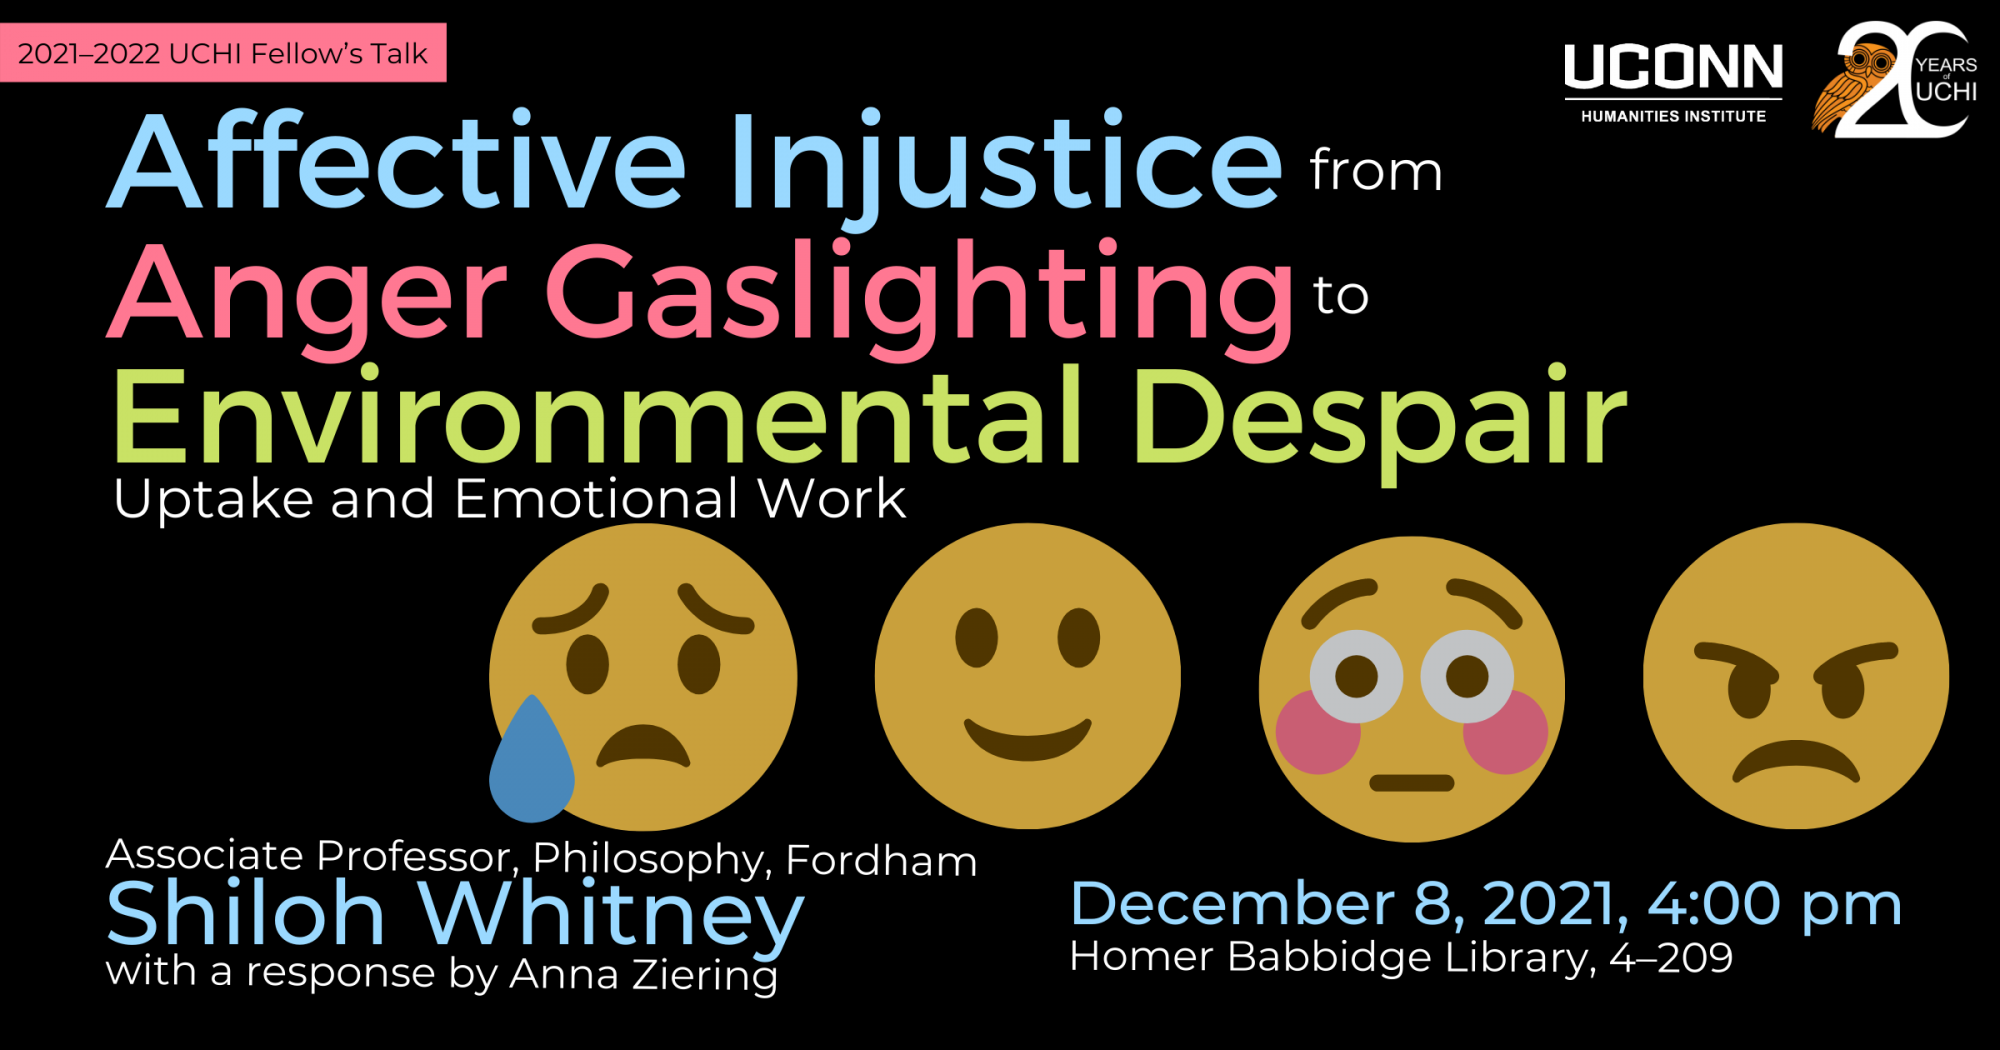 2021–22 UCHI Fellow's Talk. Affective Injustice from Anger Gaslighting to Emotional Despair: Uptake and Emotional Work. Associate Professor of Philosophy, Fordham, Shiloh Whitney with a response by Anna Ziering. December 8, 2021, 4:00pm. Homer Babbidge Library, 4-209